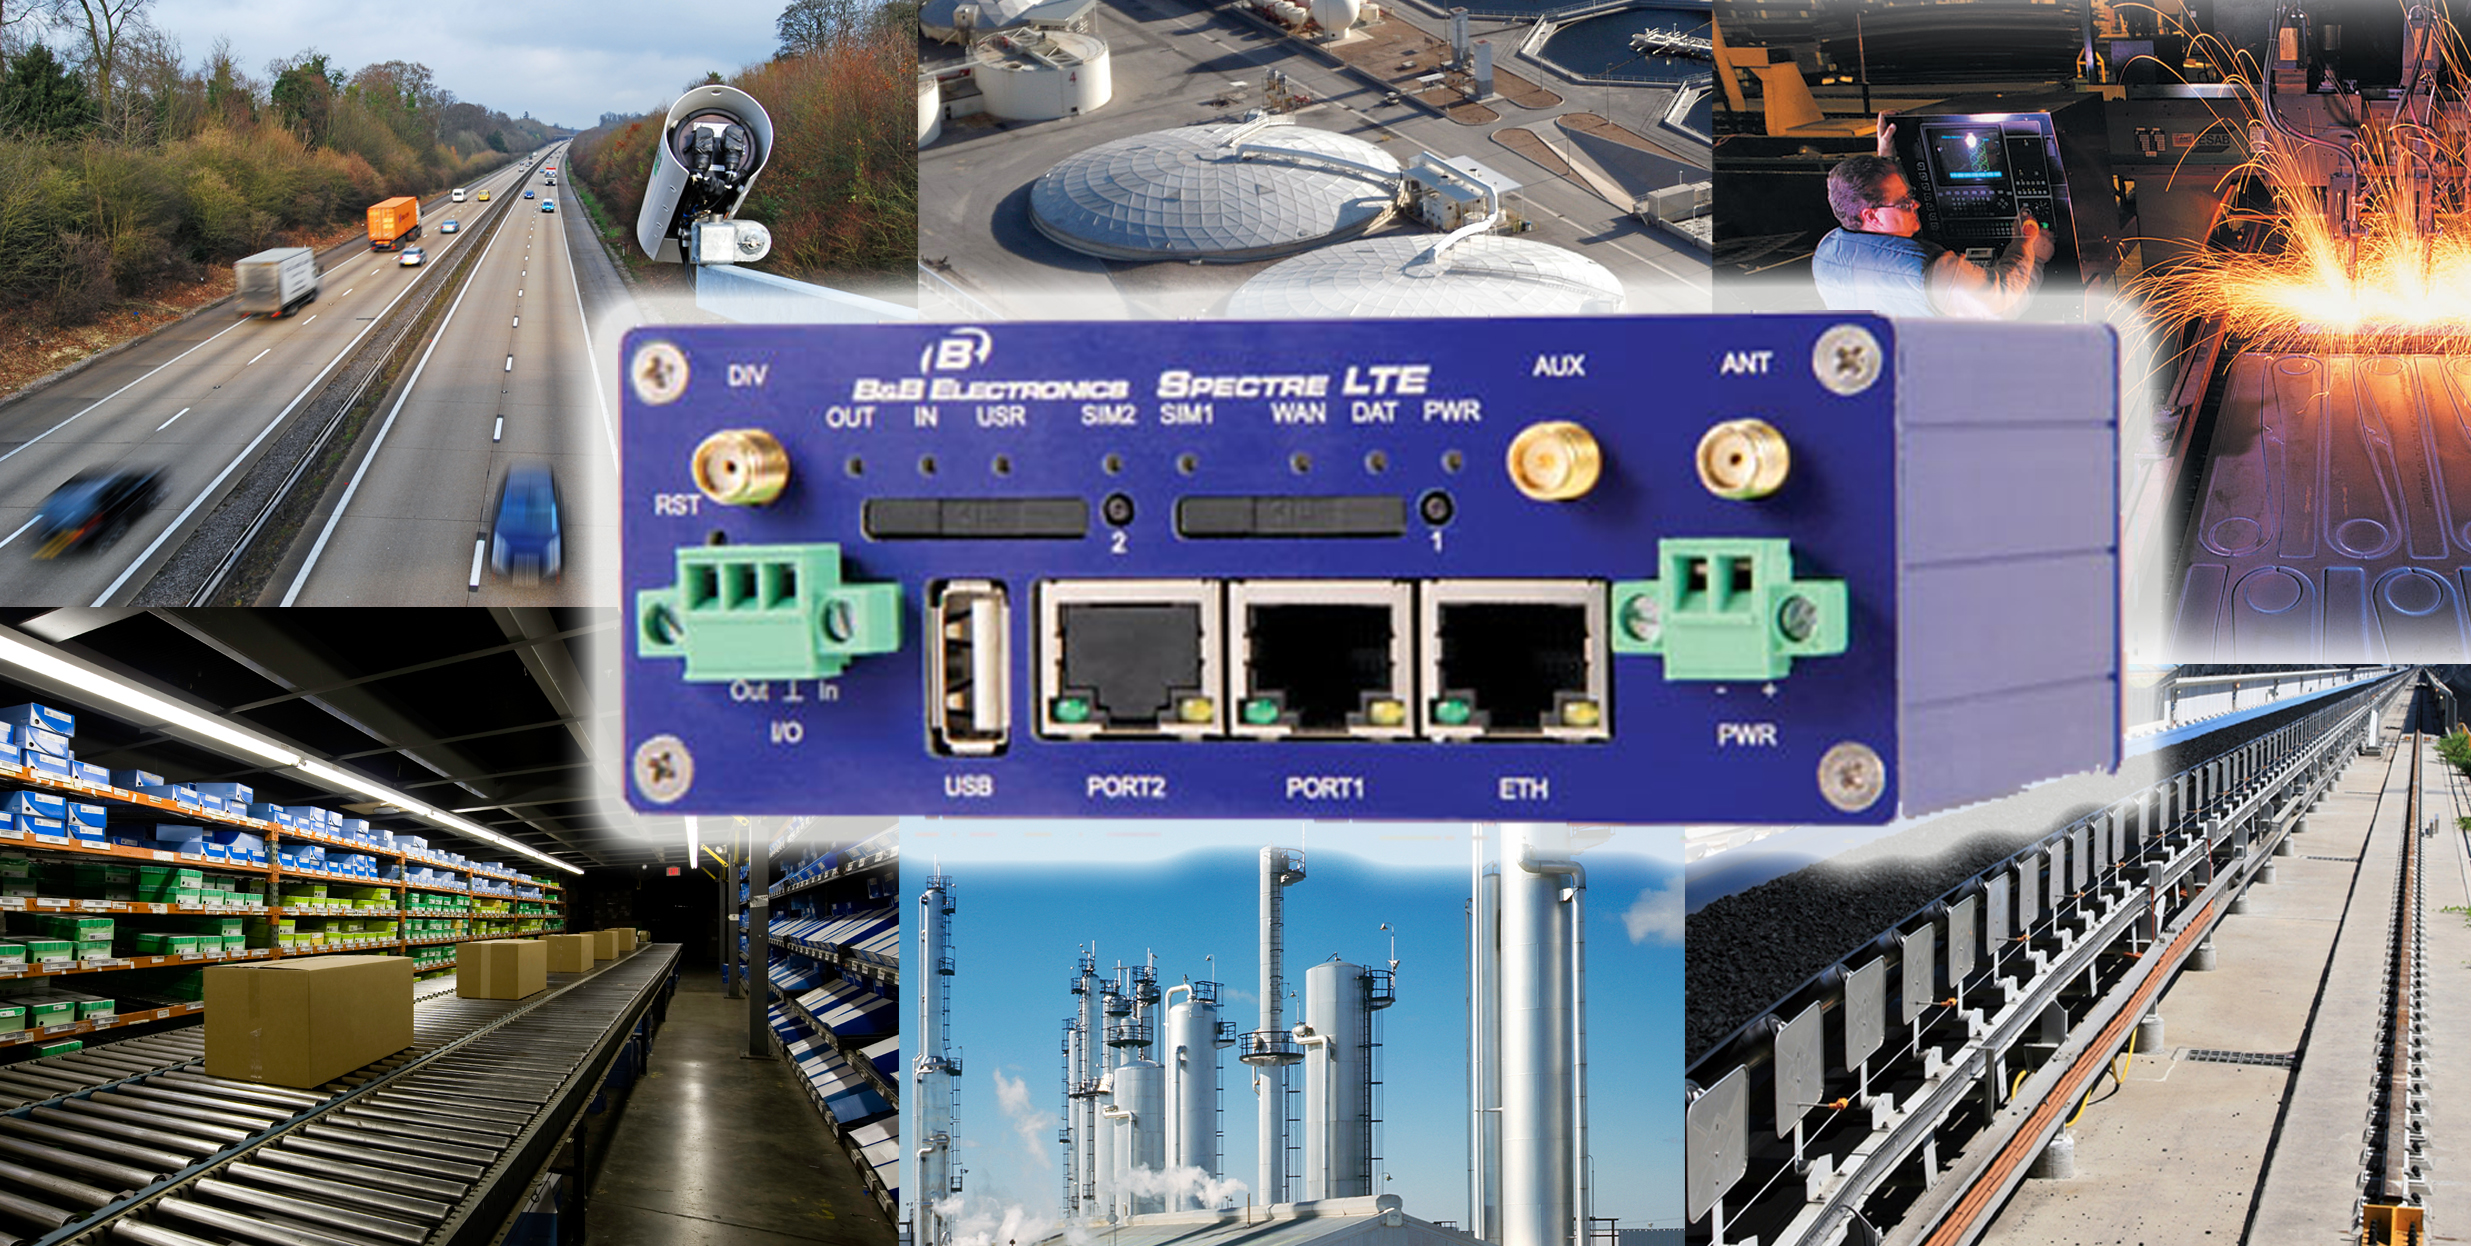 Spectre LTE in Industrial Applications